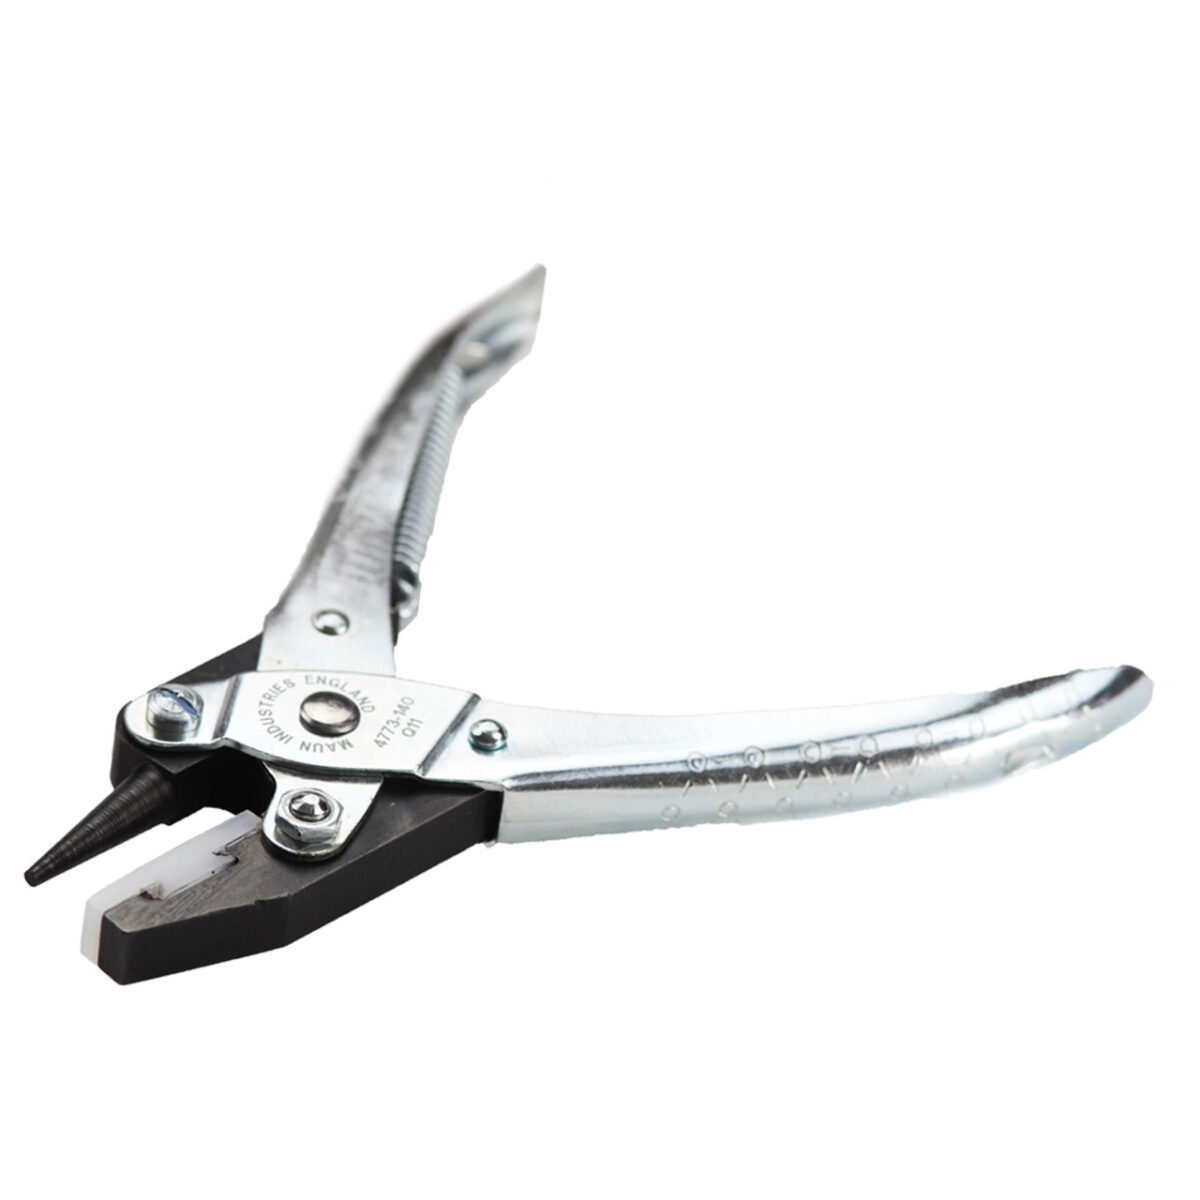 Round And Flat Nylon Jaws Parallel Plier Return Spring Jeweller's Tool 140 mm Maun 4773-140